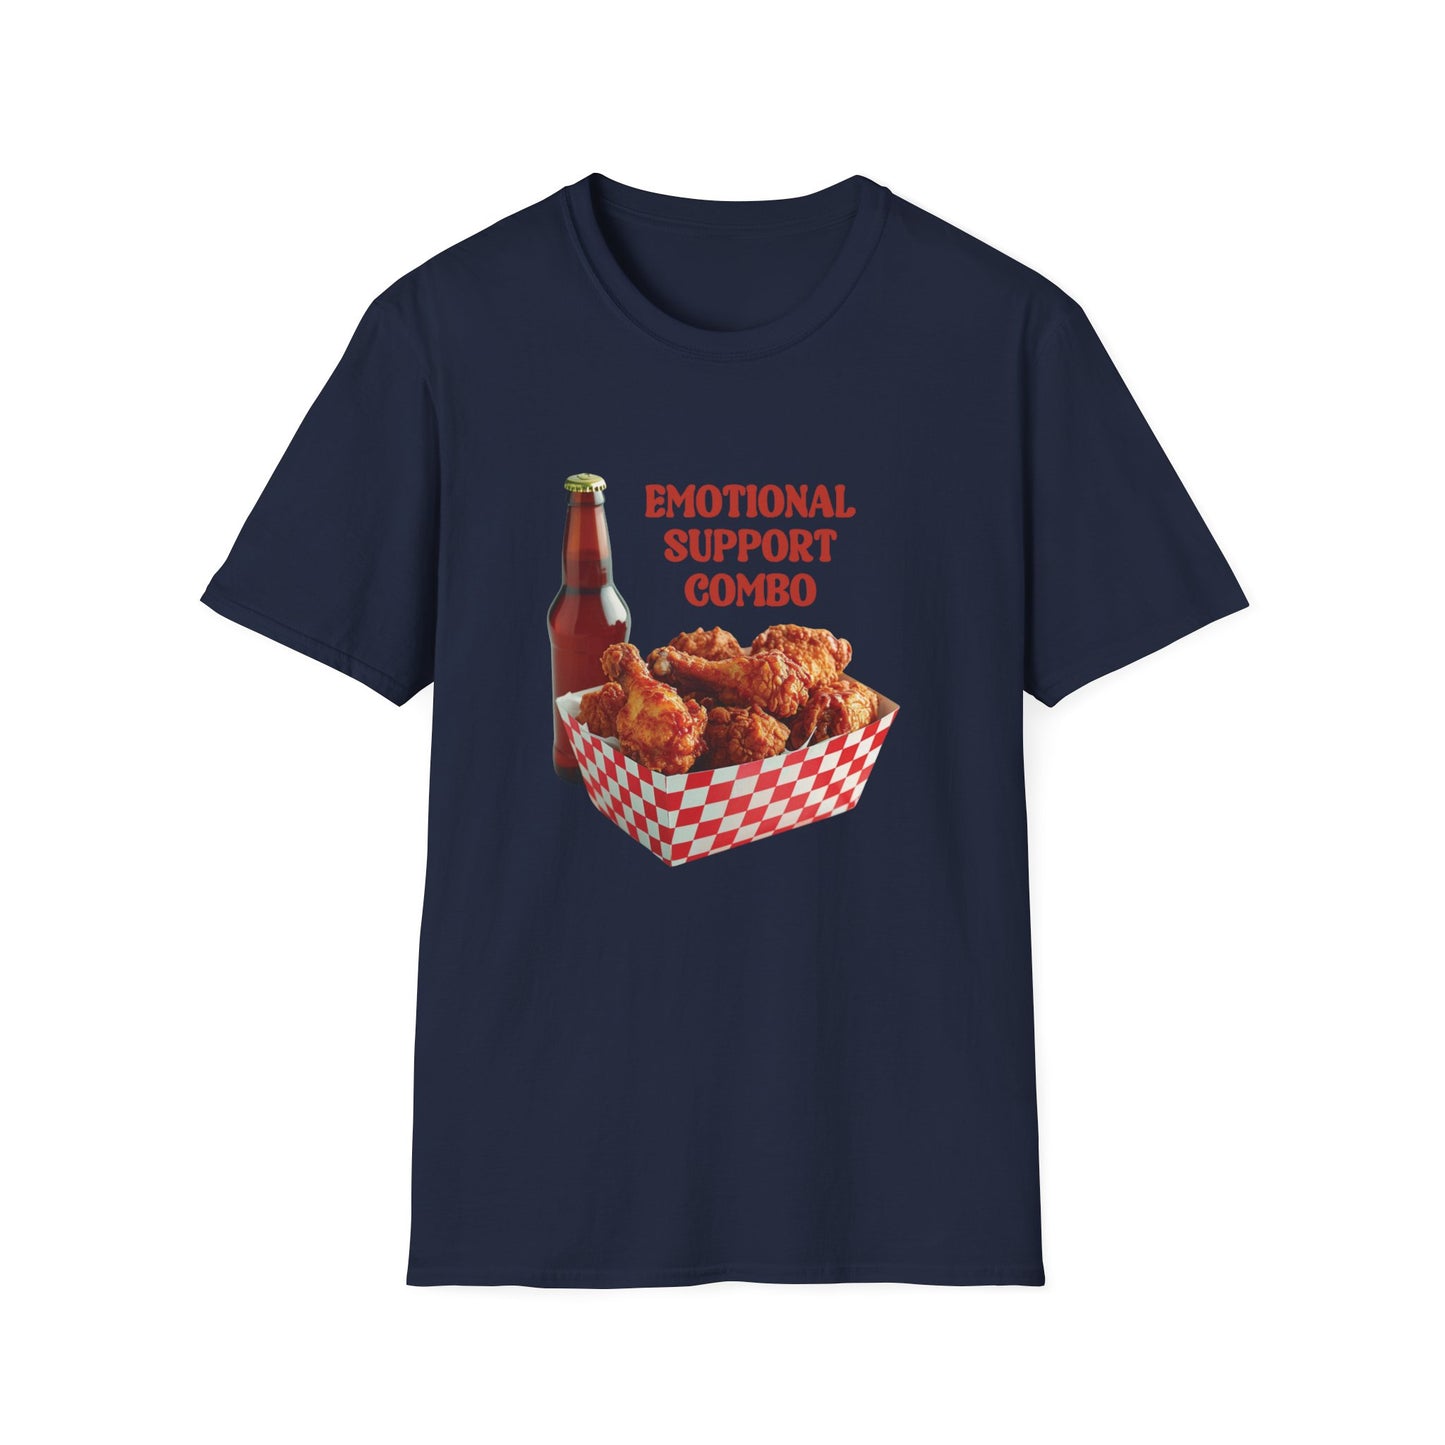 Emotional Support Humor - Unisex - Softstyle T-Shirt